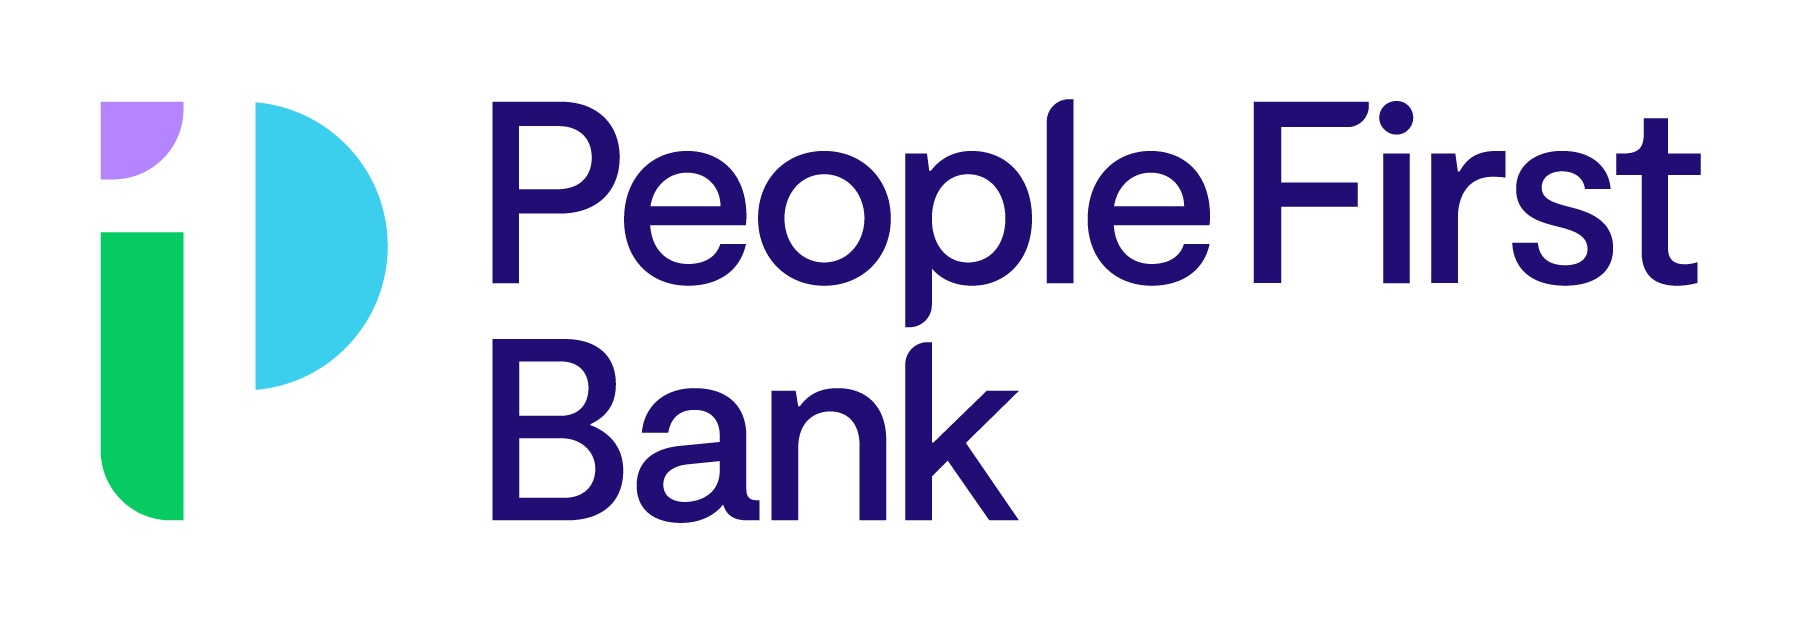 People First Bank_Logo_Primary_Multi Blue_RGB_FA1